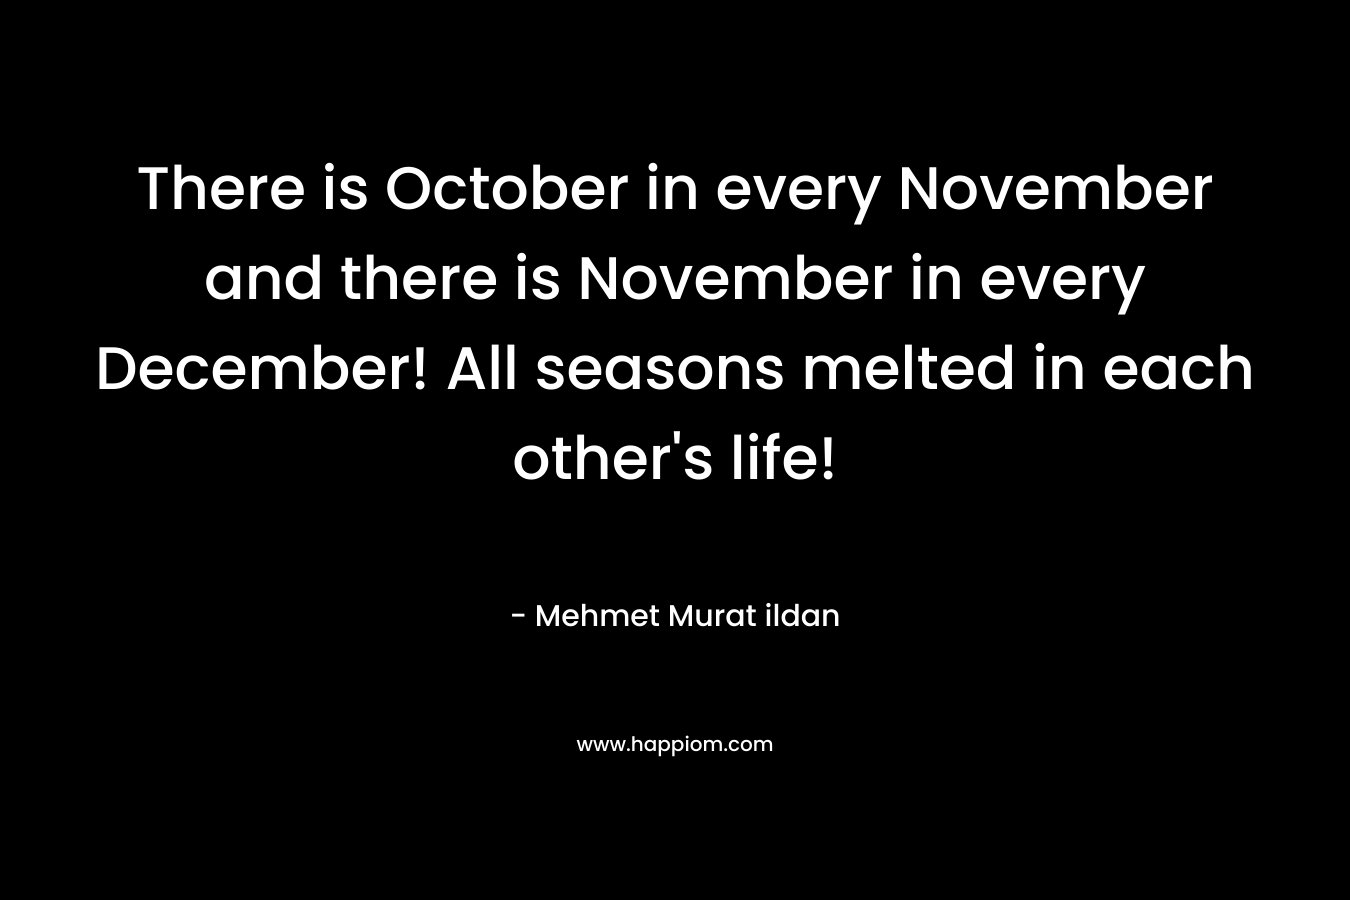 There is October in every November and there is November in every December! All seasons melted in each other’s life! – Mehmet Murat ildan